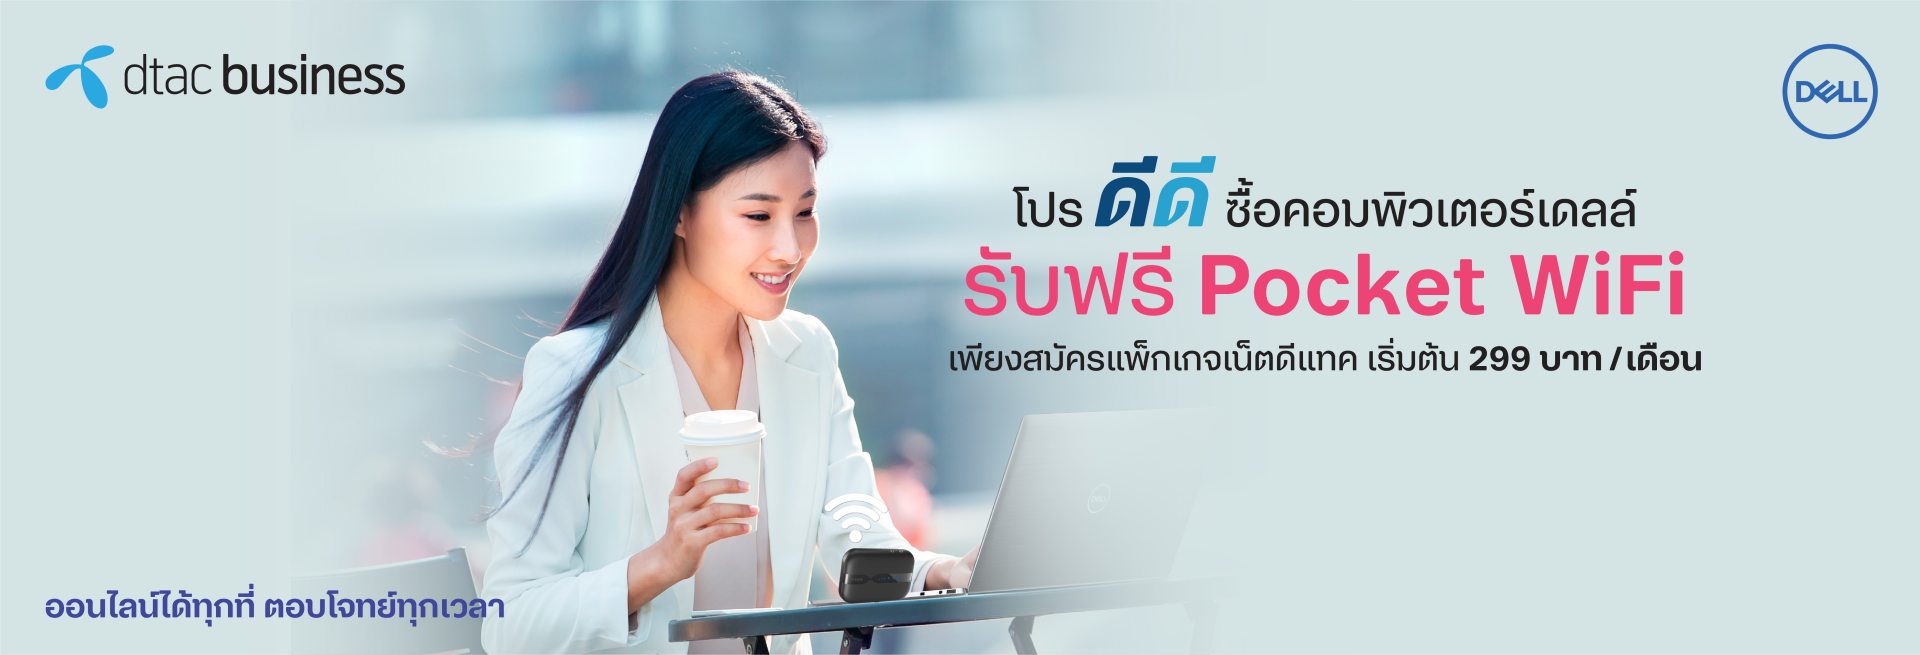 AW dtac business x Dell Banner